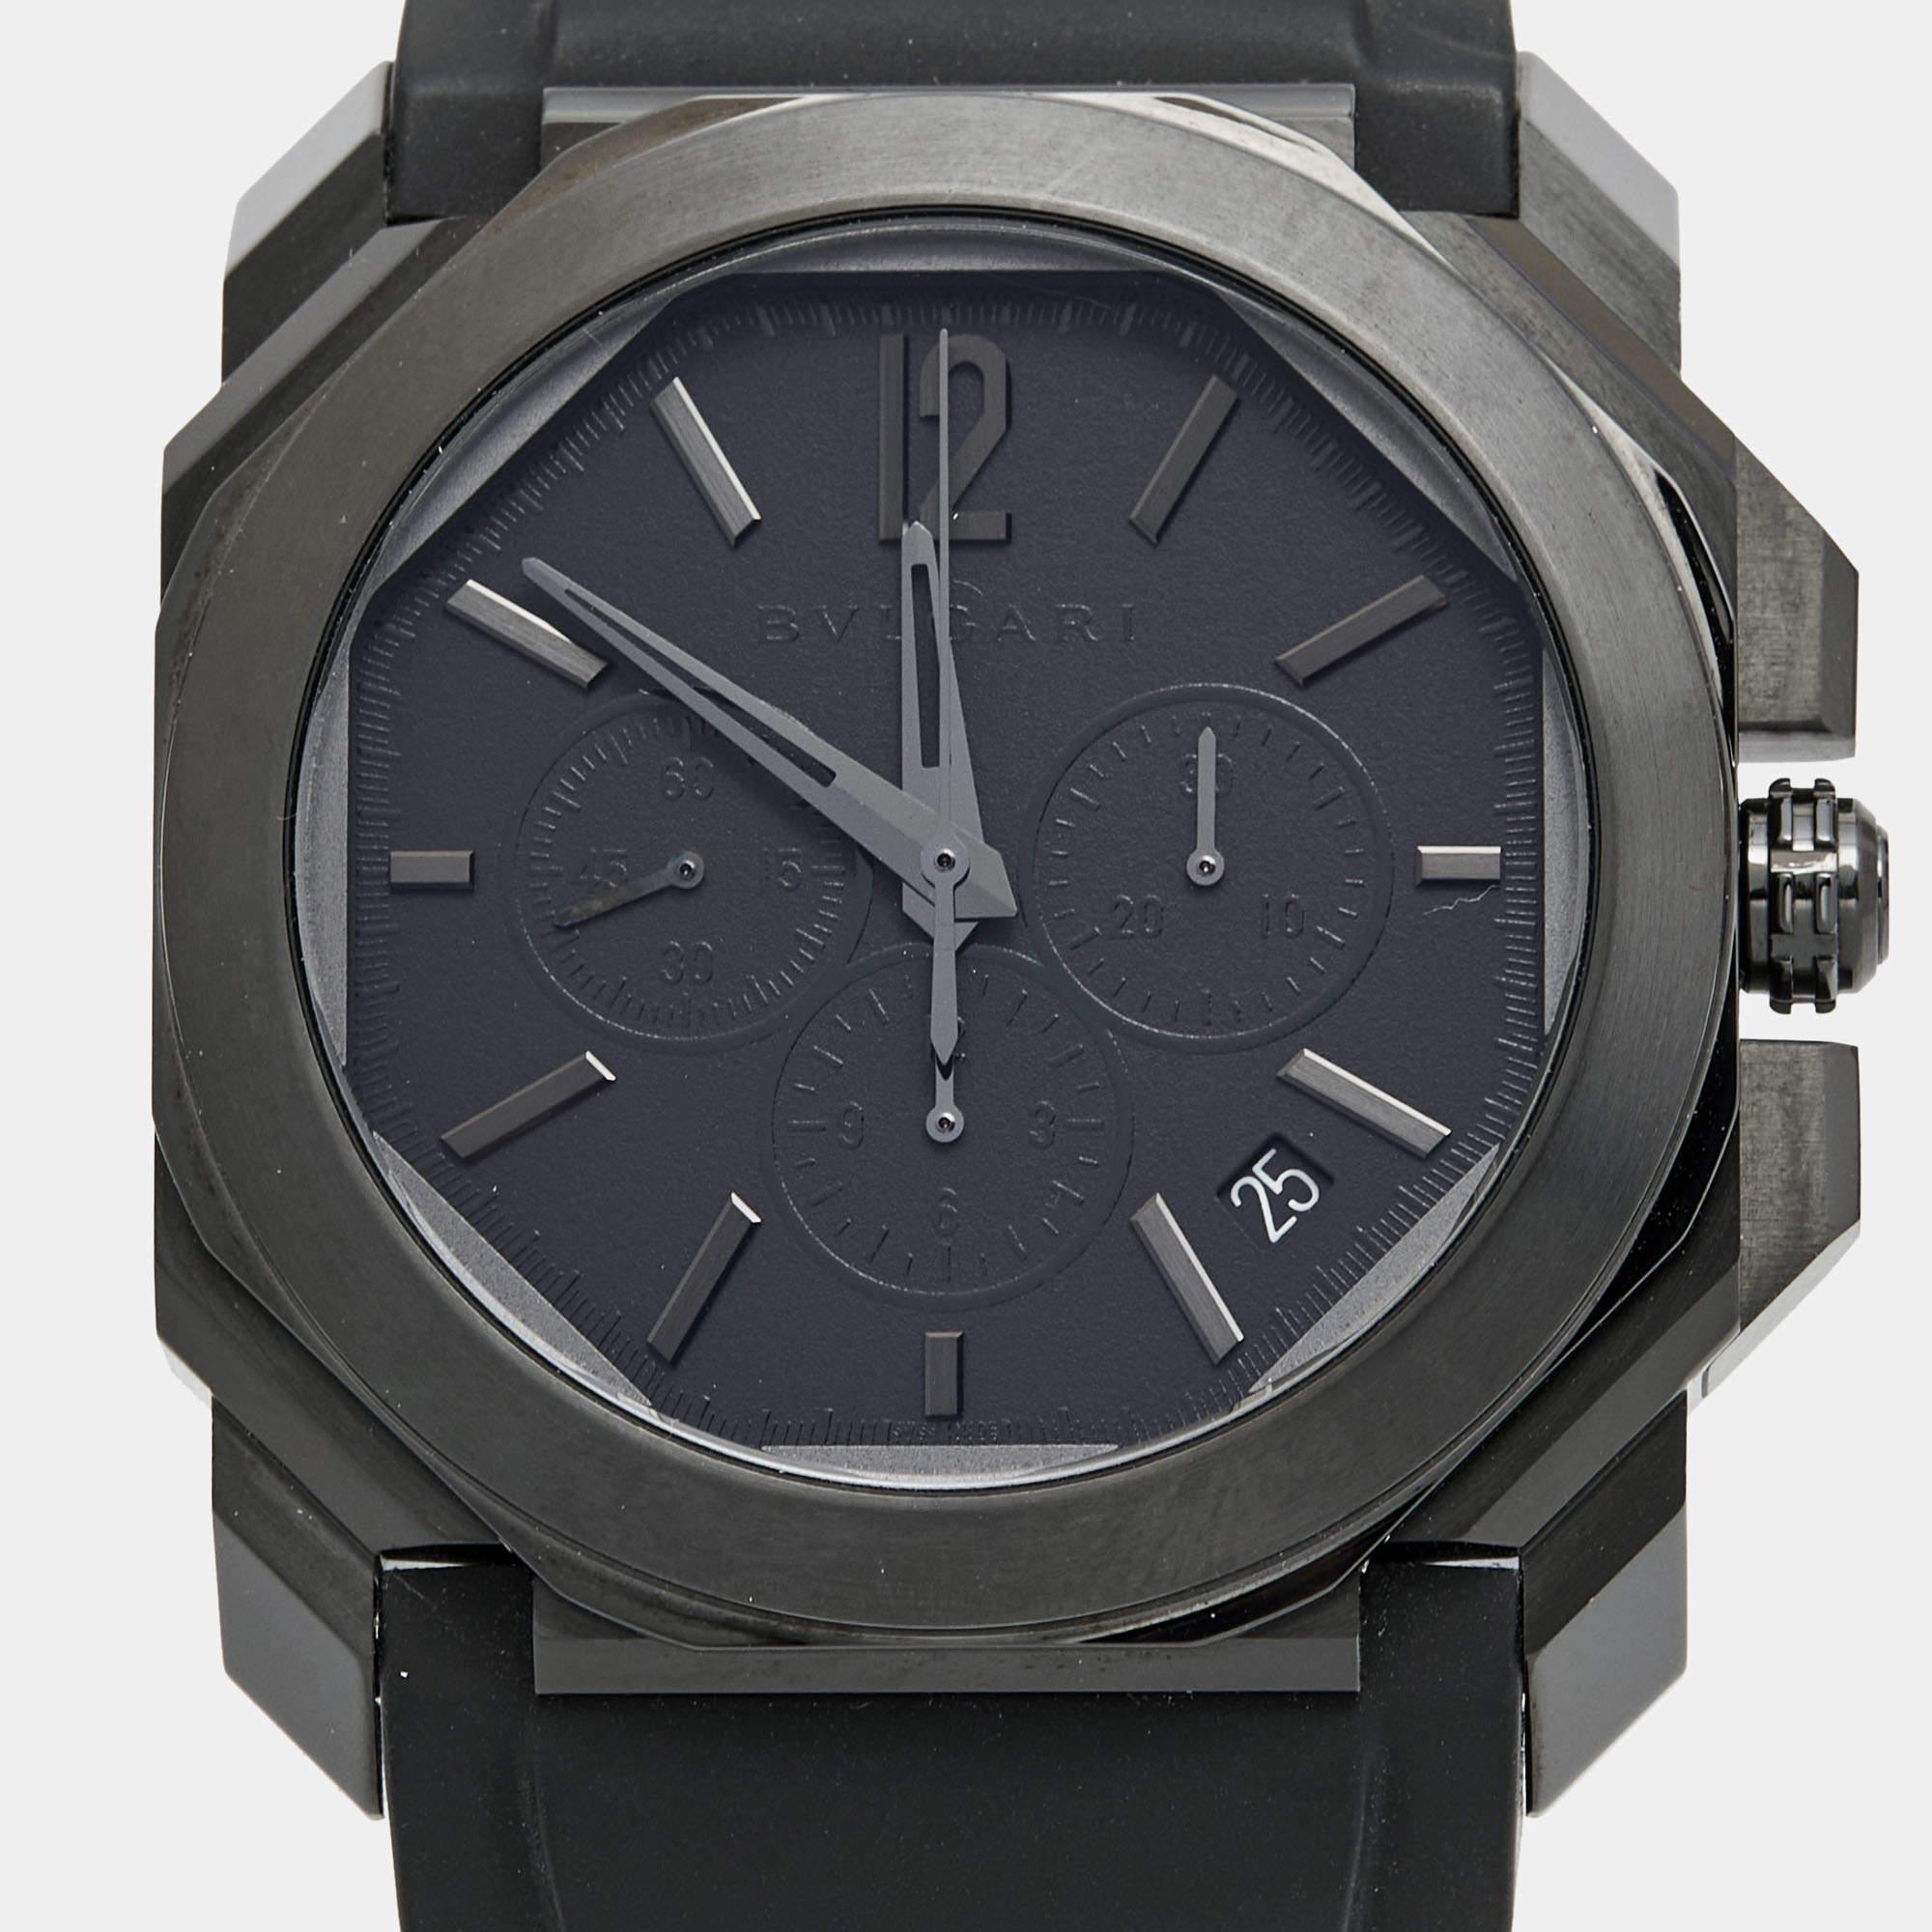 The Bvlgari Octo 103027 men's wristwatch exudes contemporary elegance. Its sleek octagonal case, crafted from durable stainless steel with a striking black PVD coating, harmonizes effortlessly with the supple rubber strap, resulting in a timepiece